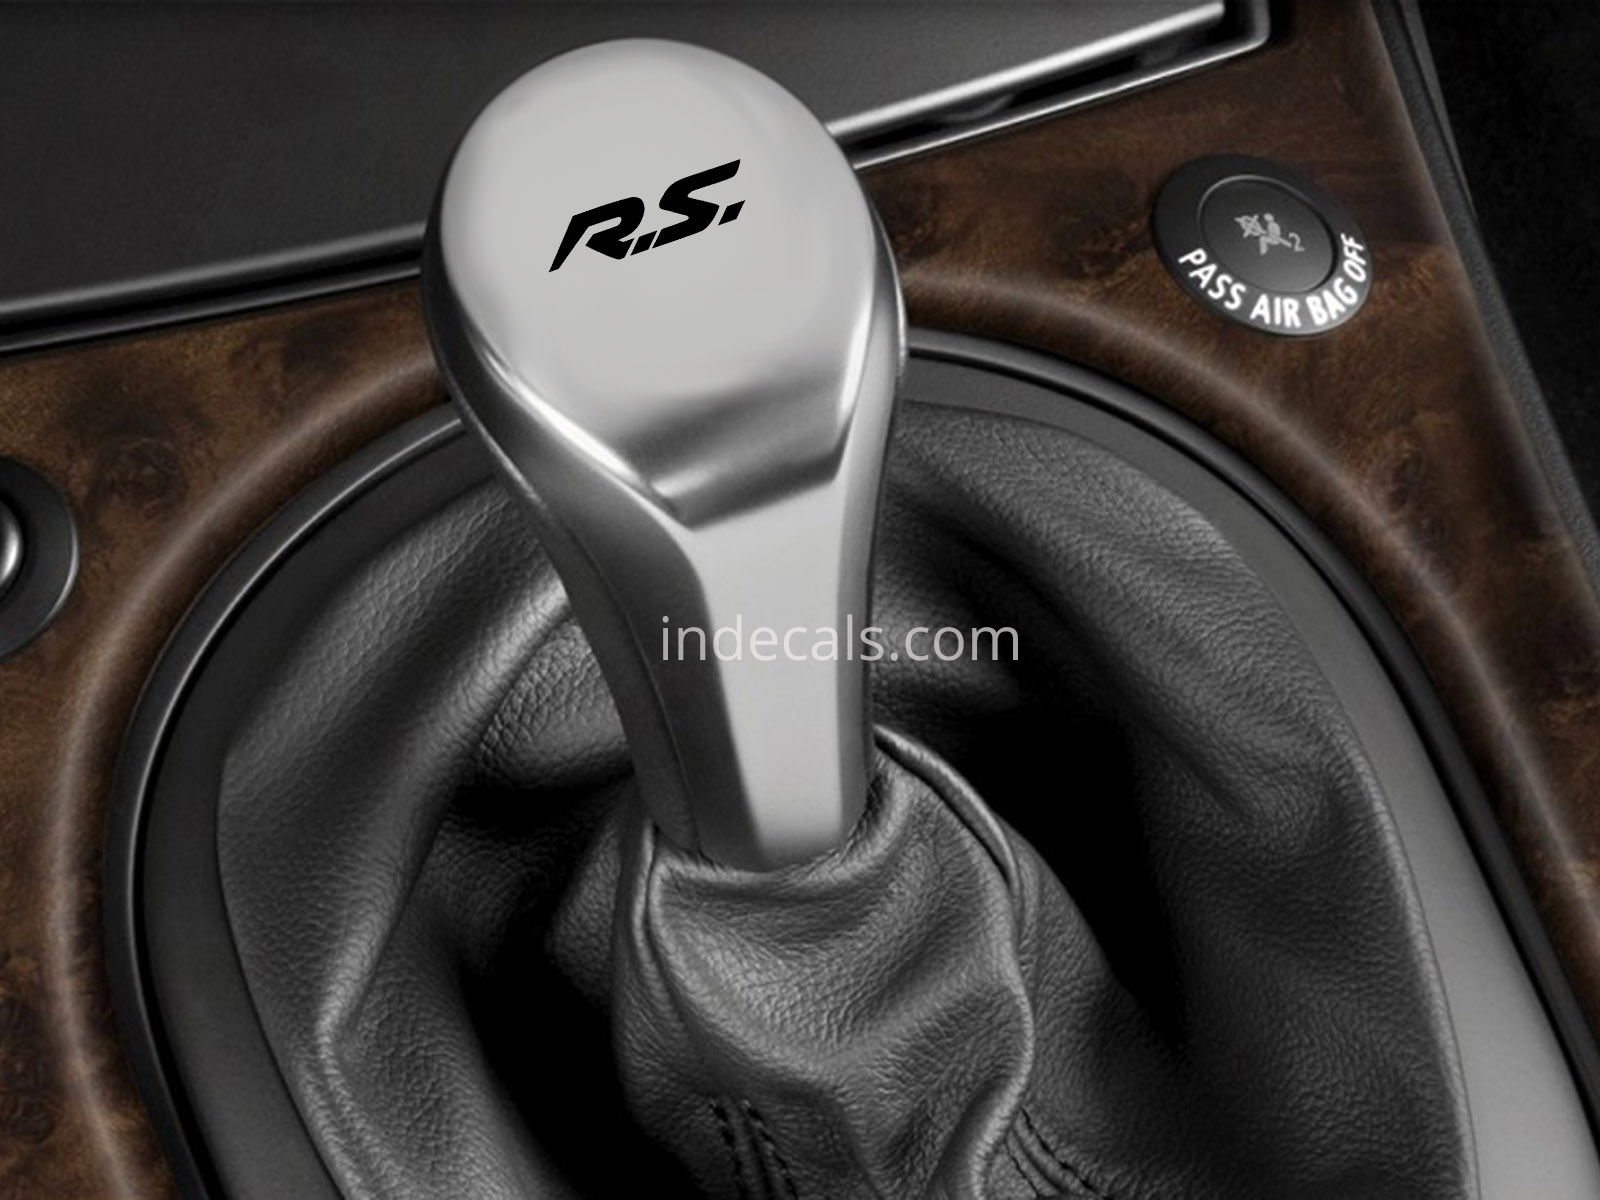 3 x Renault RS Stickers for Gear Knob - Black